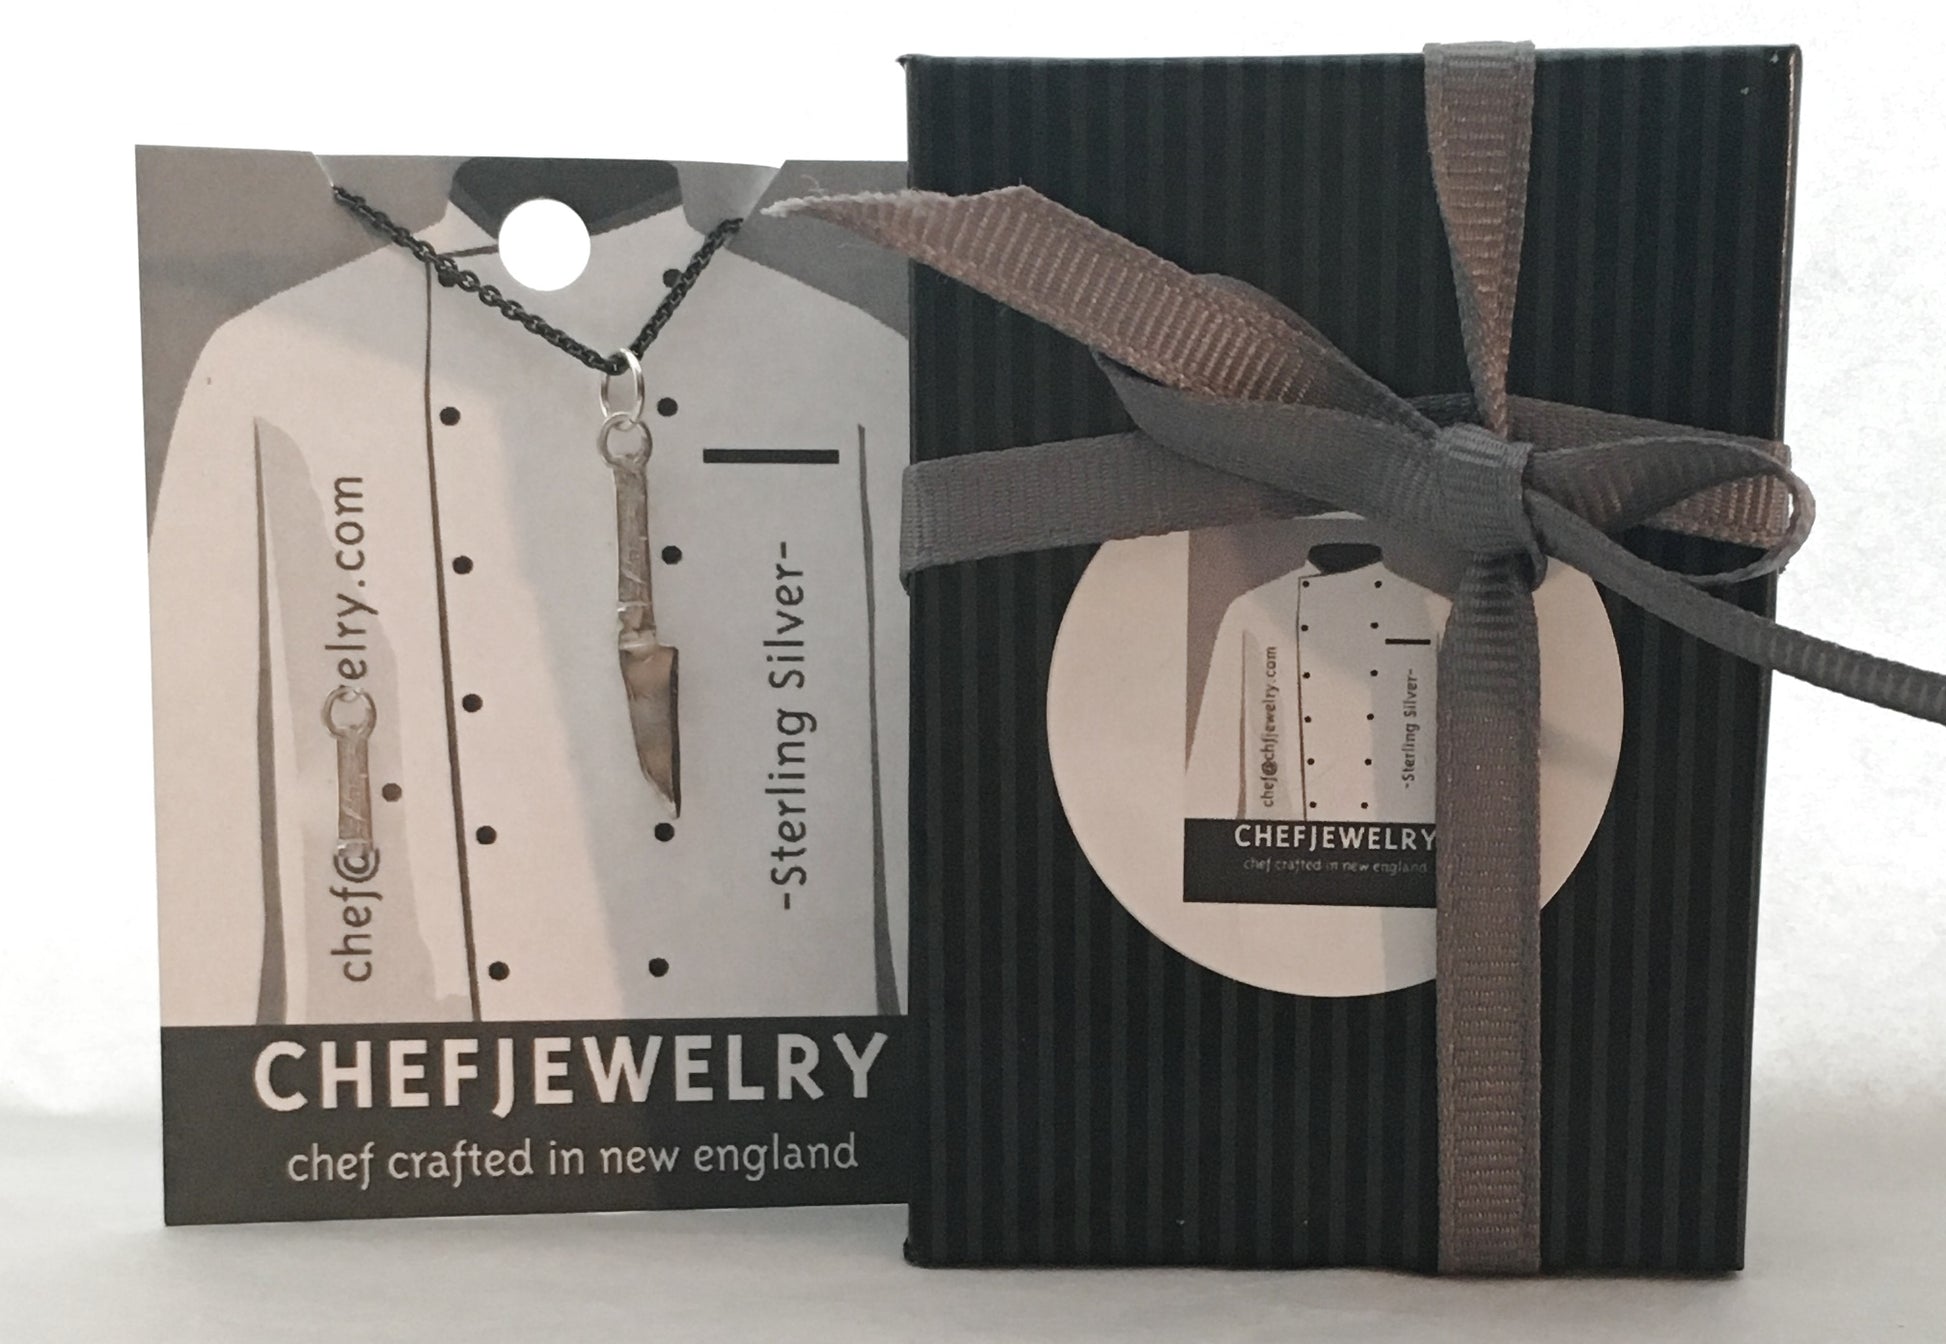 Your ring will arrive in this custom ChefJewelry packaging